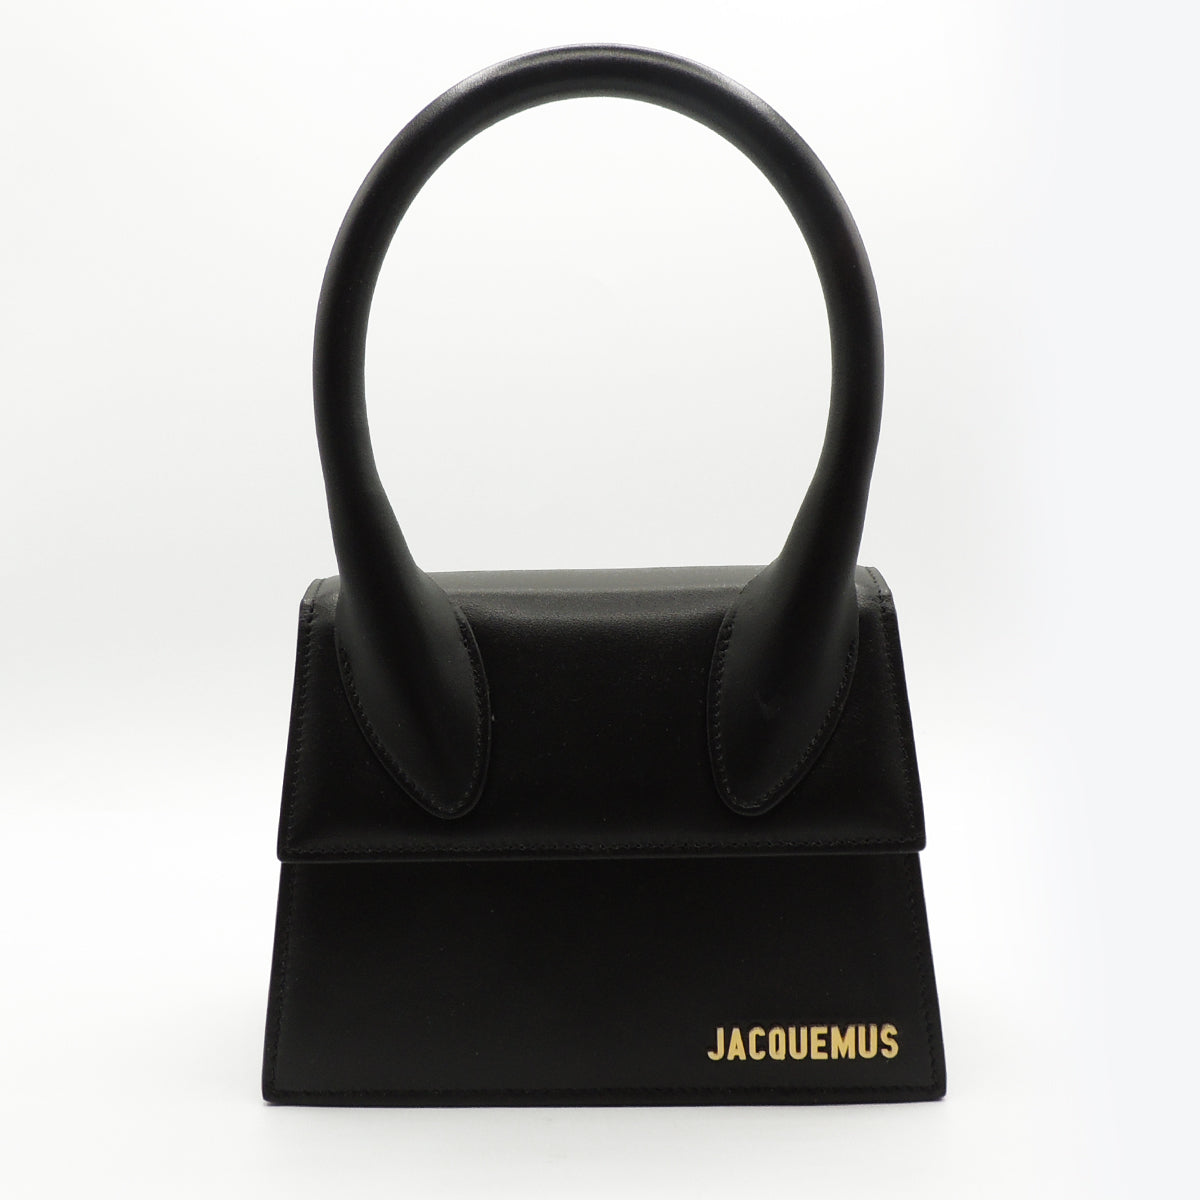 Jacquemus Le Chiquito Moyen leather top-handle bag in black